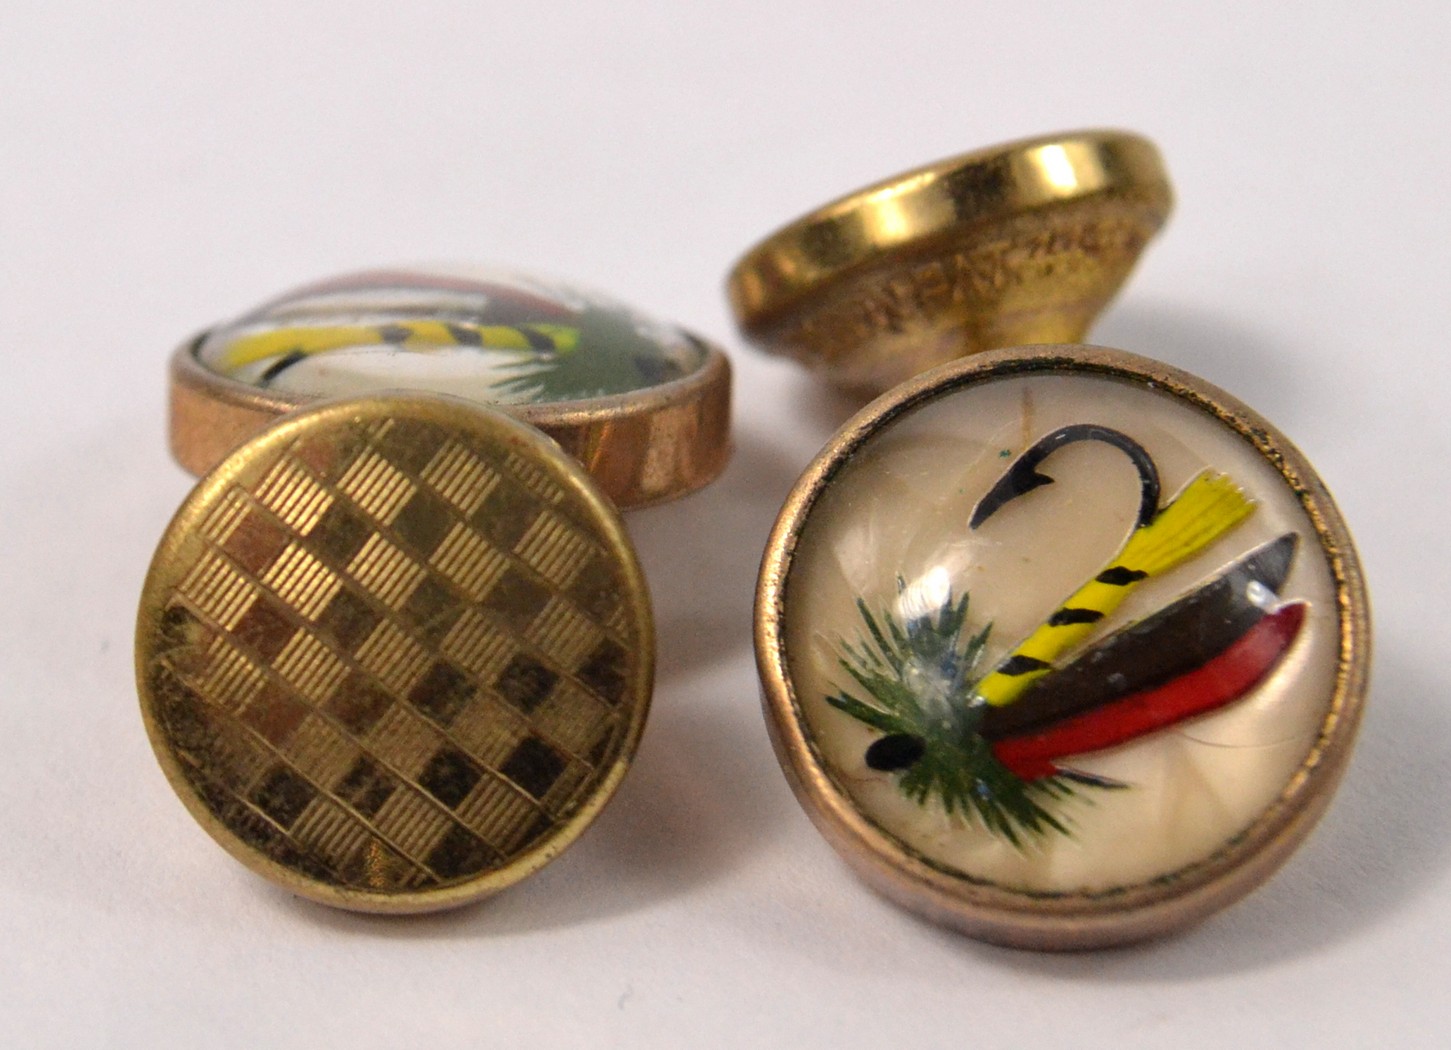 RARE 'FOR THE ANGLER AT HEART' A pair of vintage cufflinks and a matching tie-pin depicting - Image 5 of 9